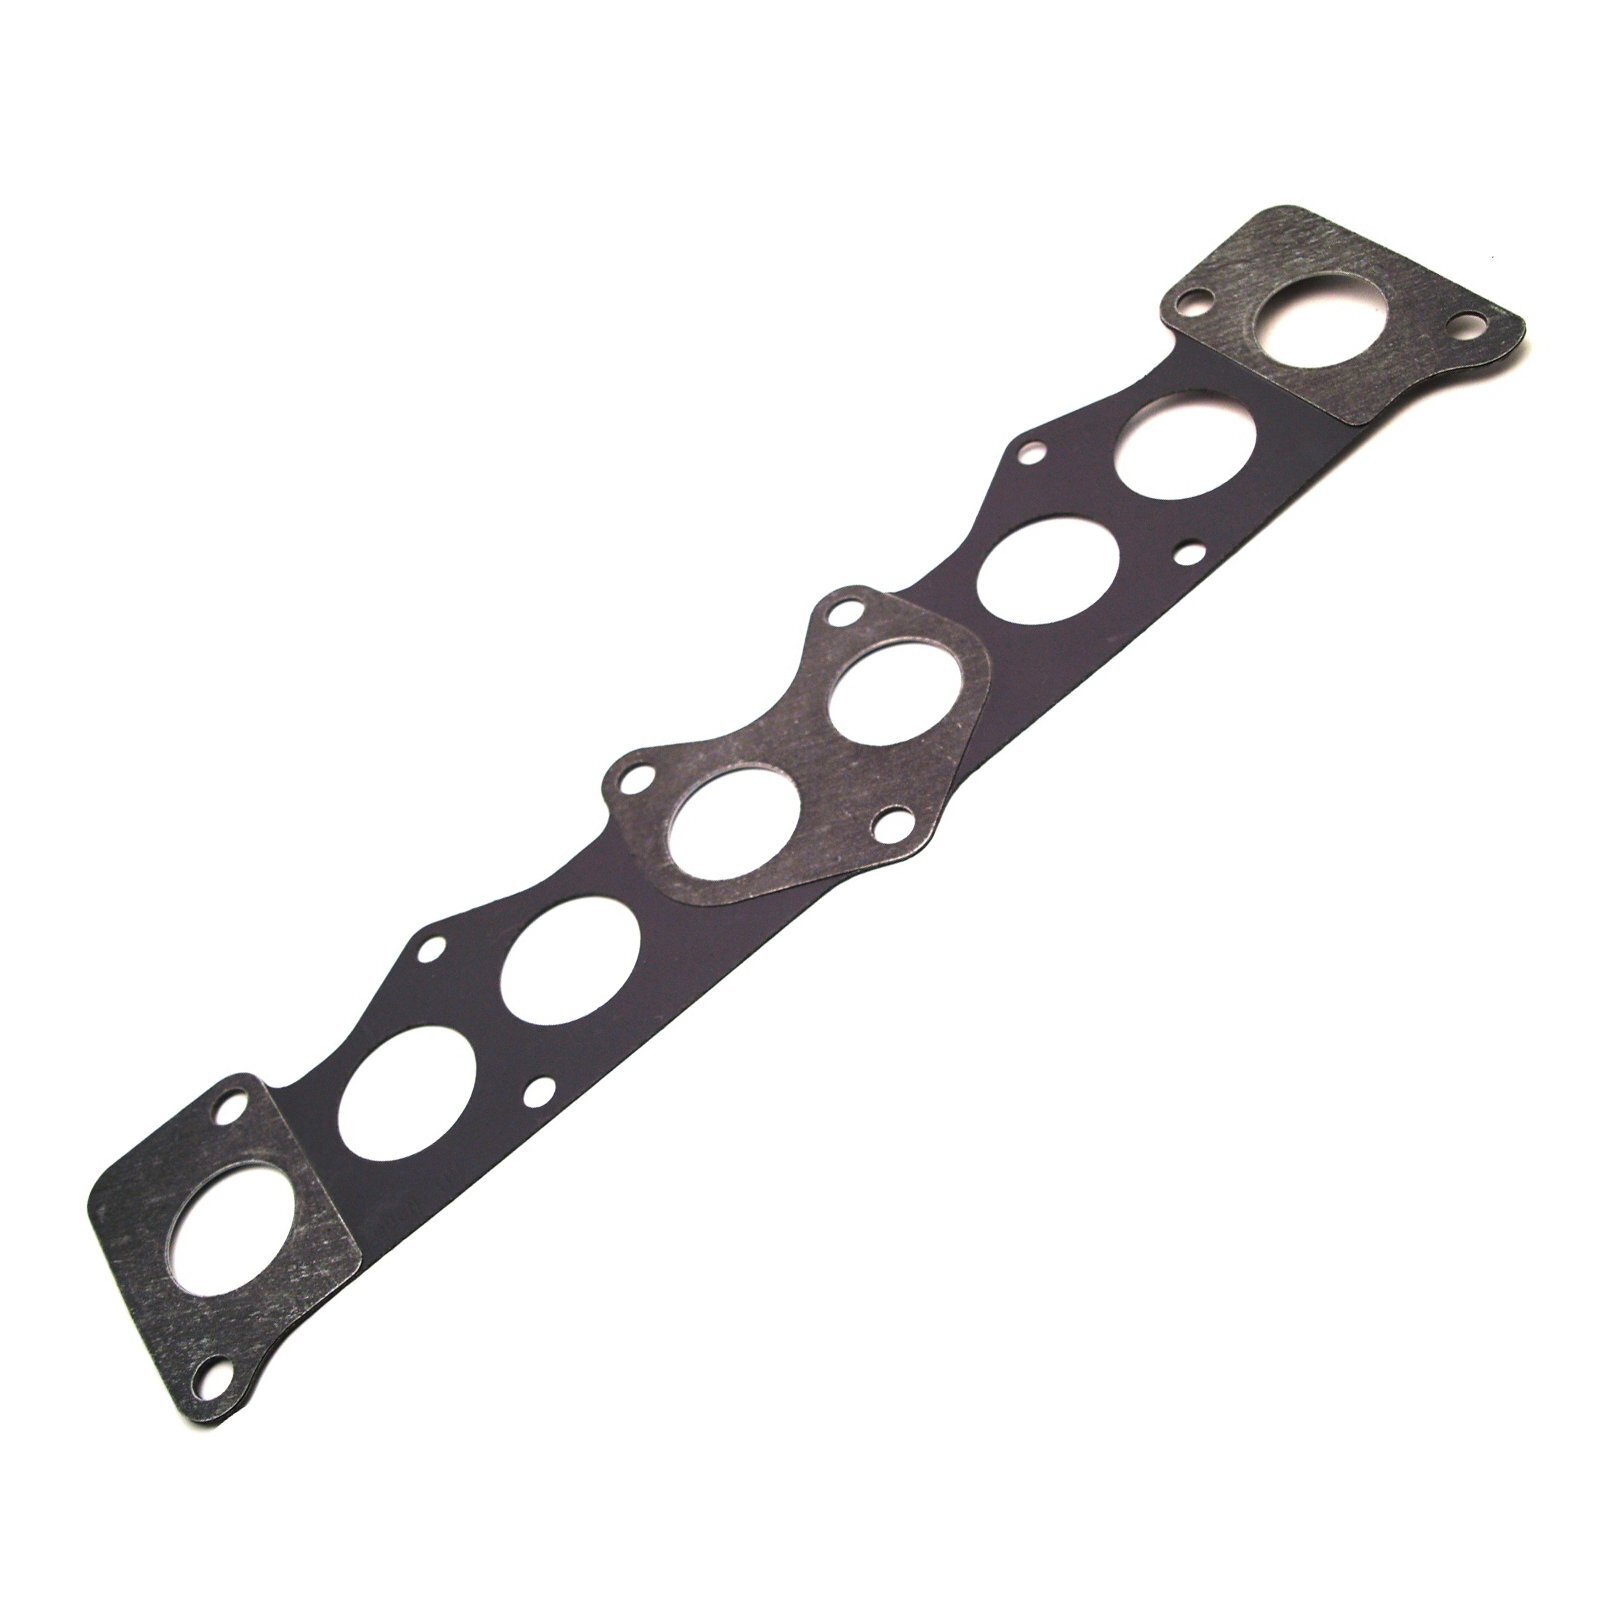 LAND ROVER DISCOVERY DEFENDER 300Tdi  MANIFOLD GASKET   ERR3785